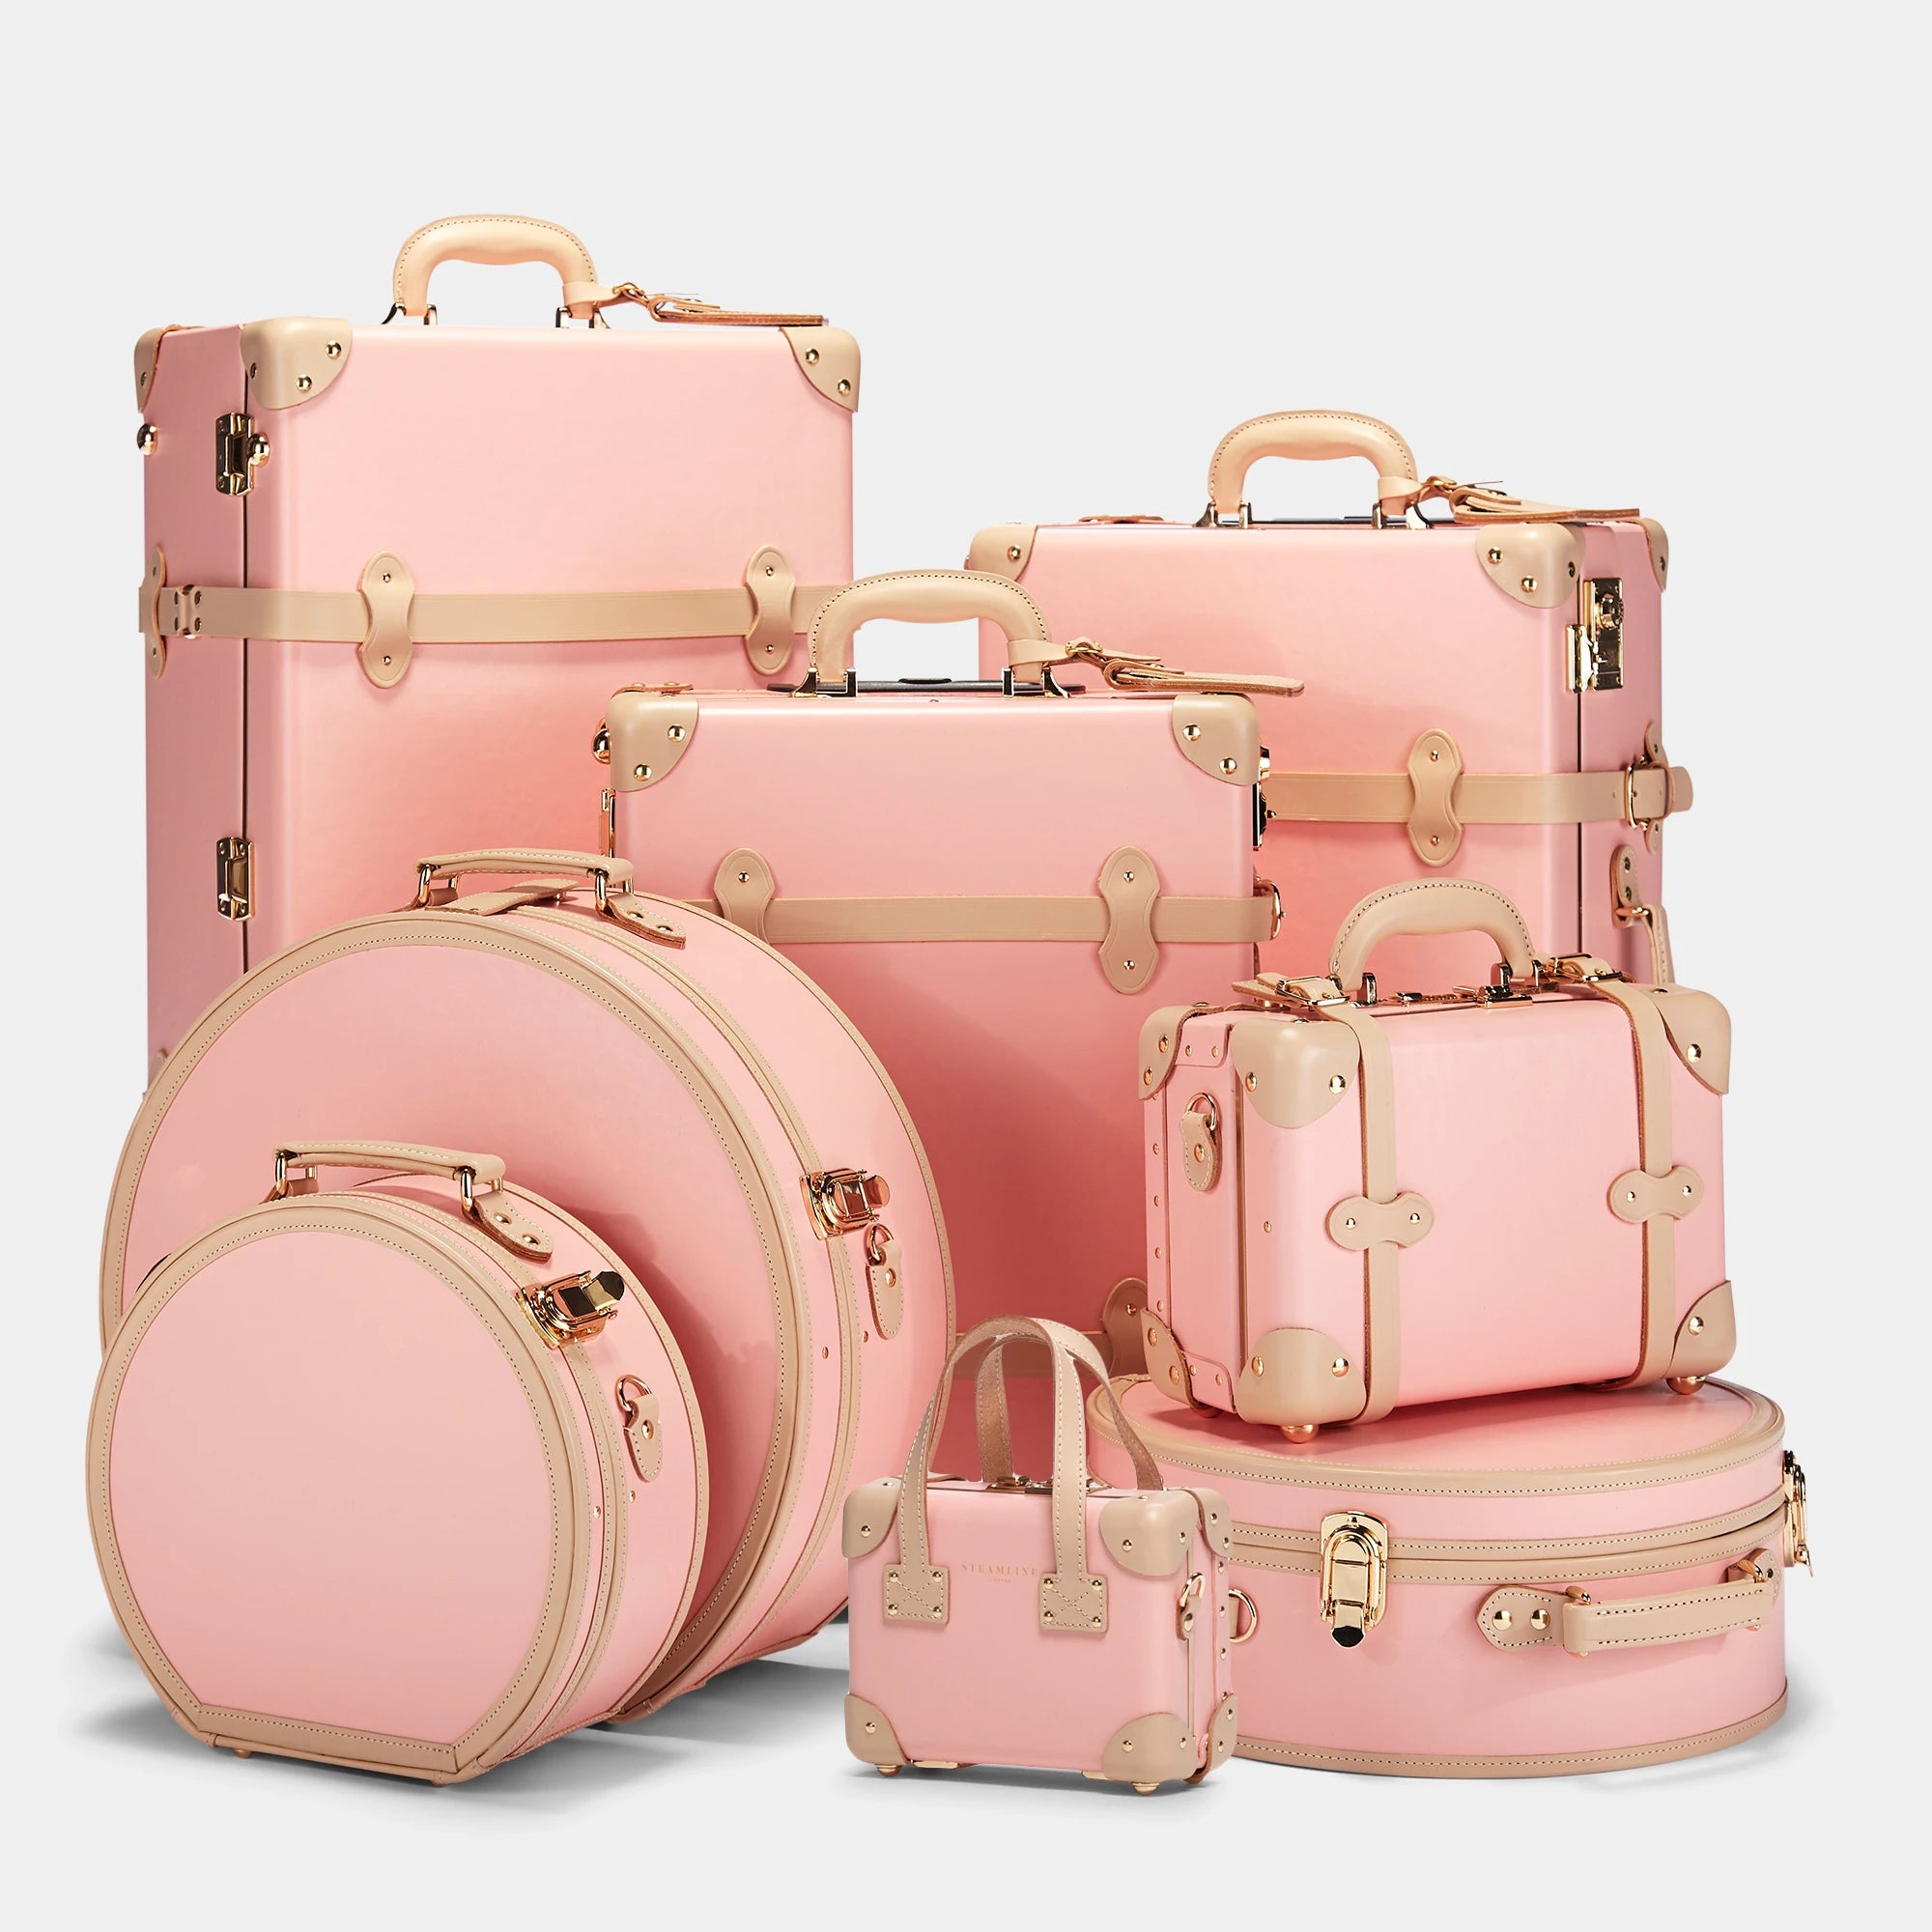 Luggage From Iconic Movies - Pretty Vintage Suitcases